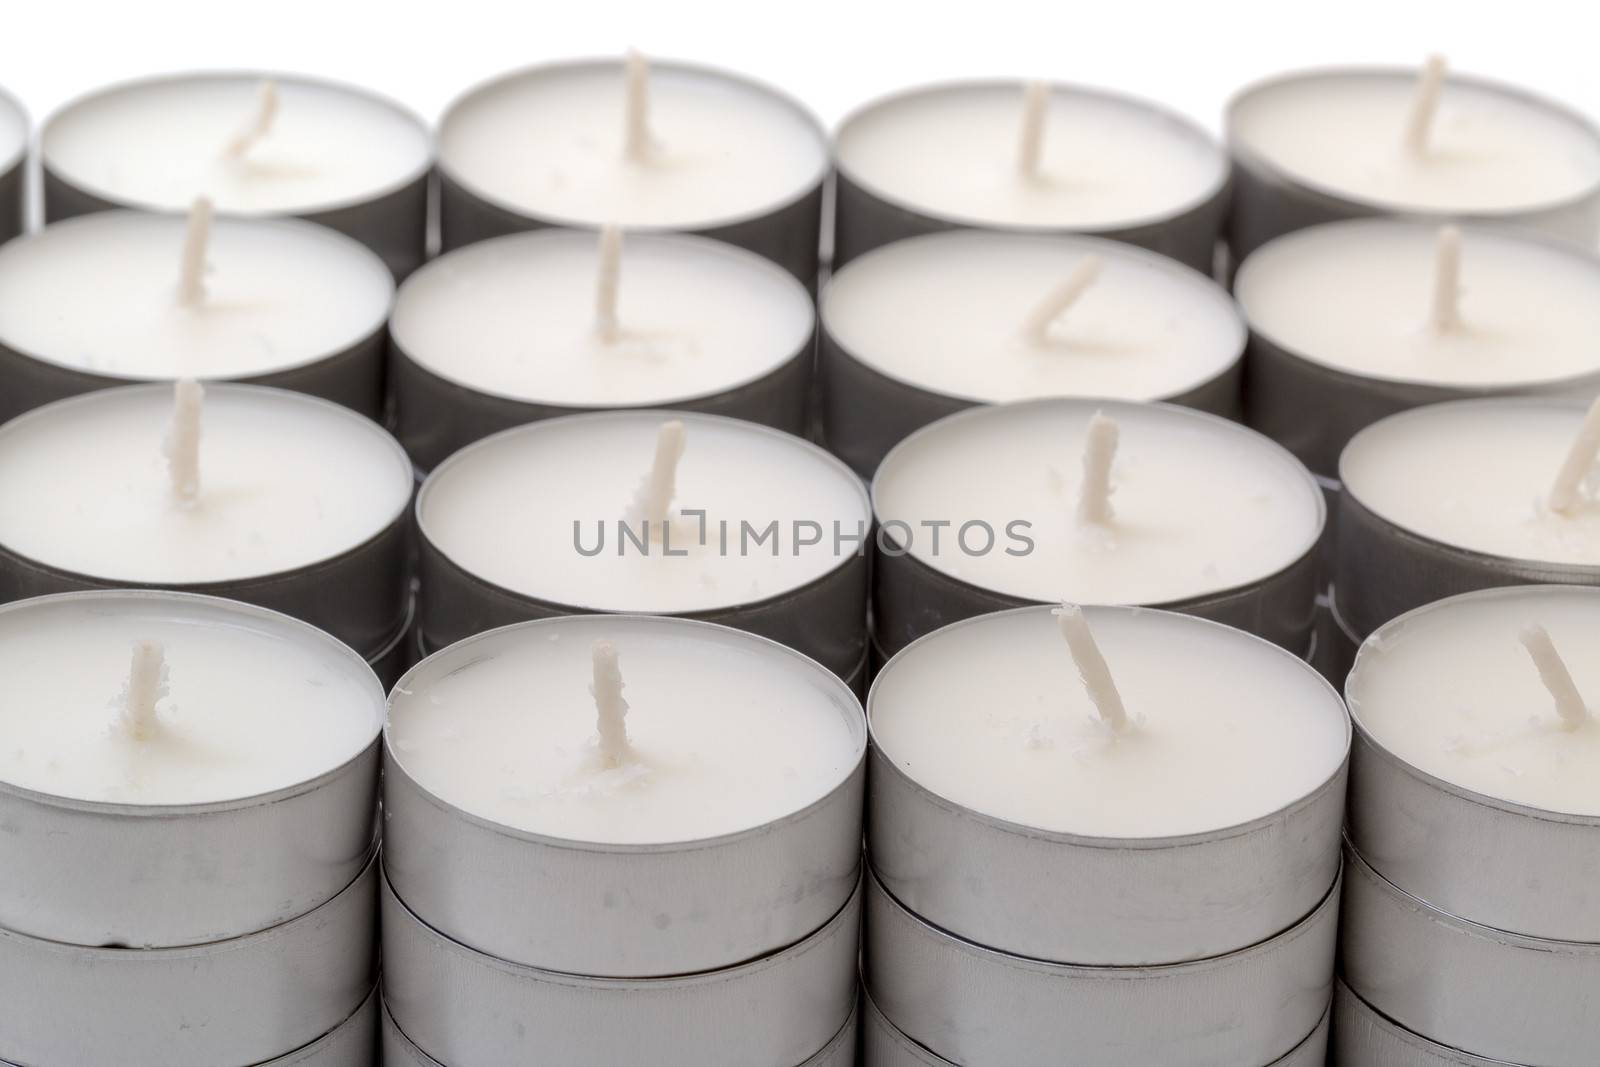 Rows of white wax tea light candles by Discovod